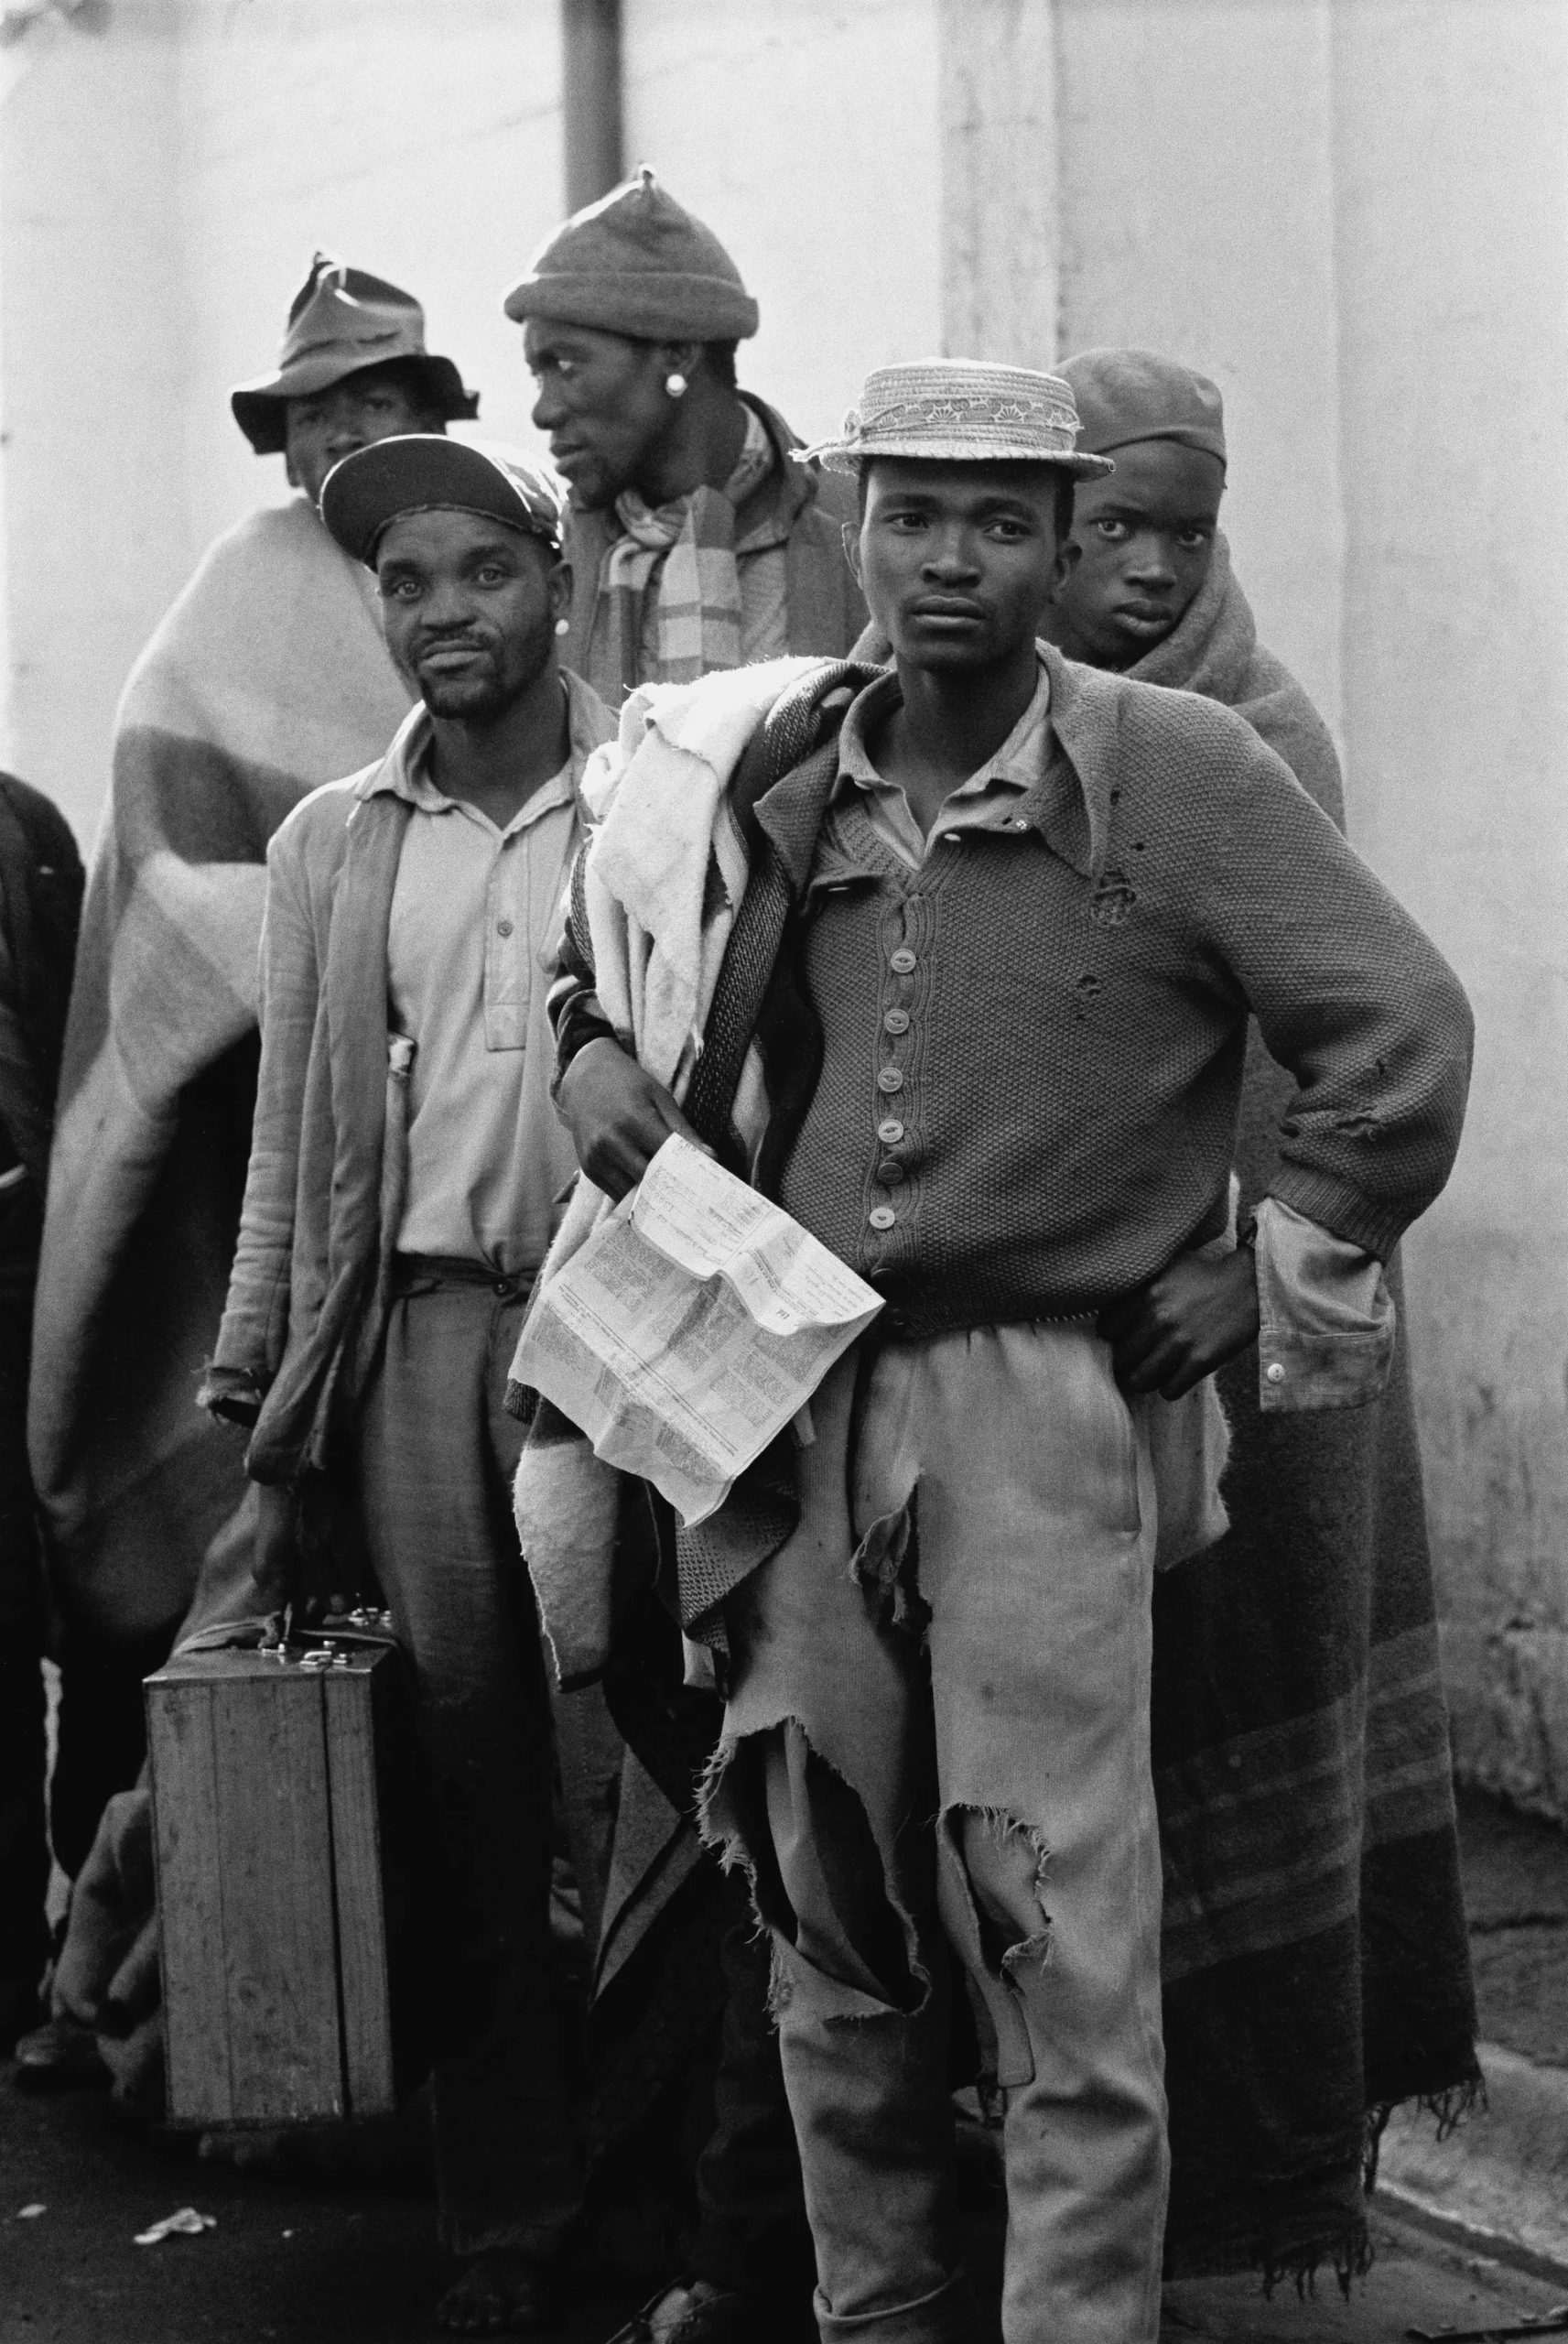 Ernest Coles Groundbreaking Photographs Of South African Apartheid Have Been Rediscovered After